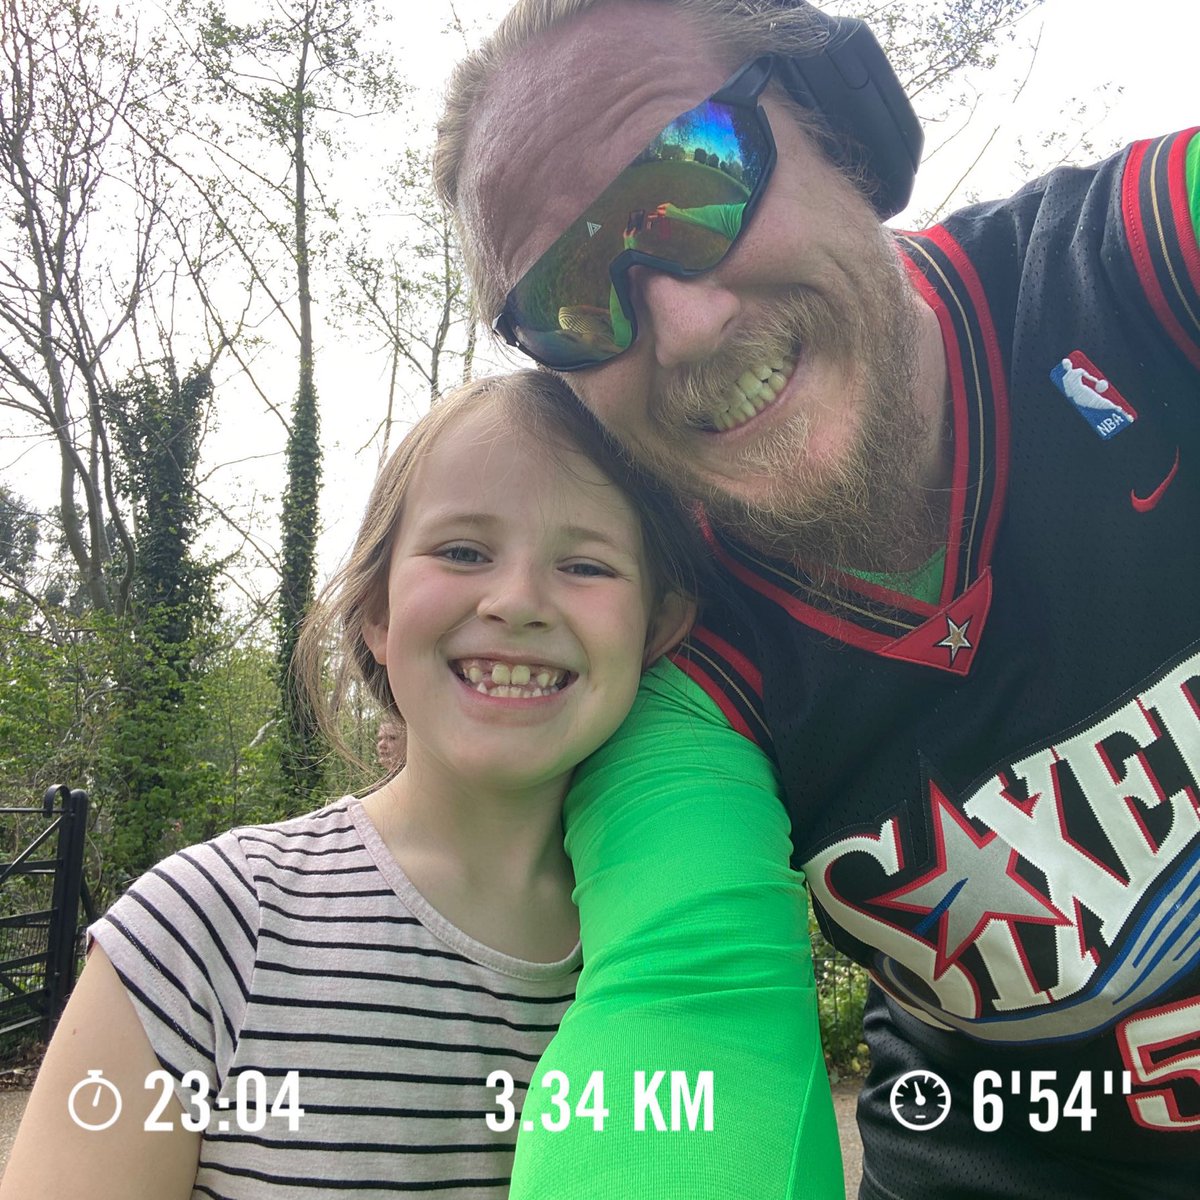 Saturday and it was a first. Father daughter run. #motivation #SaturdayRun